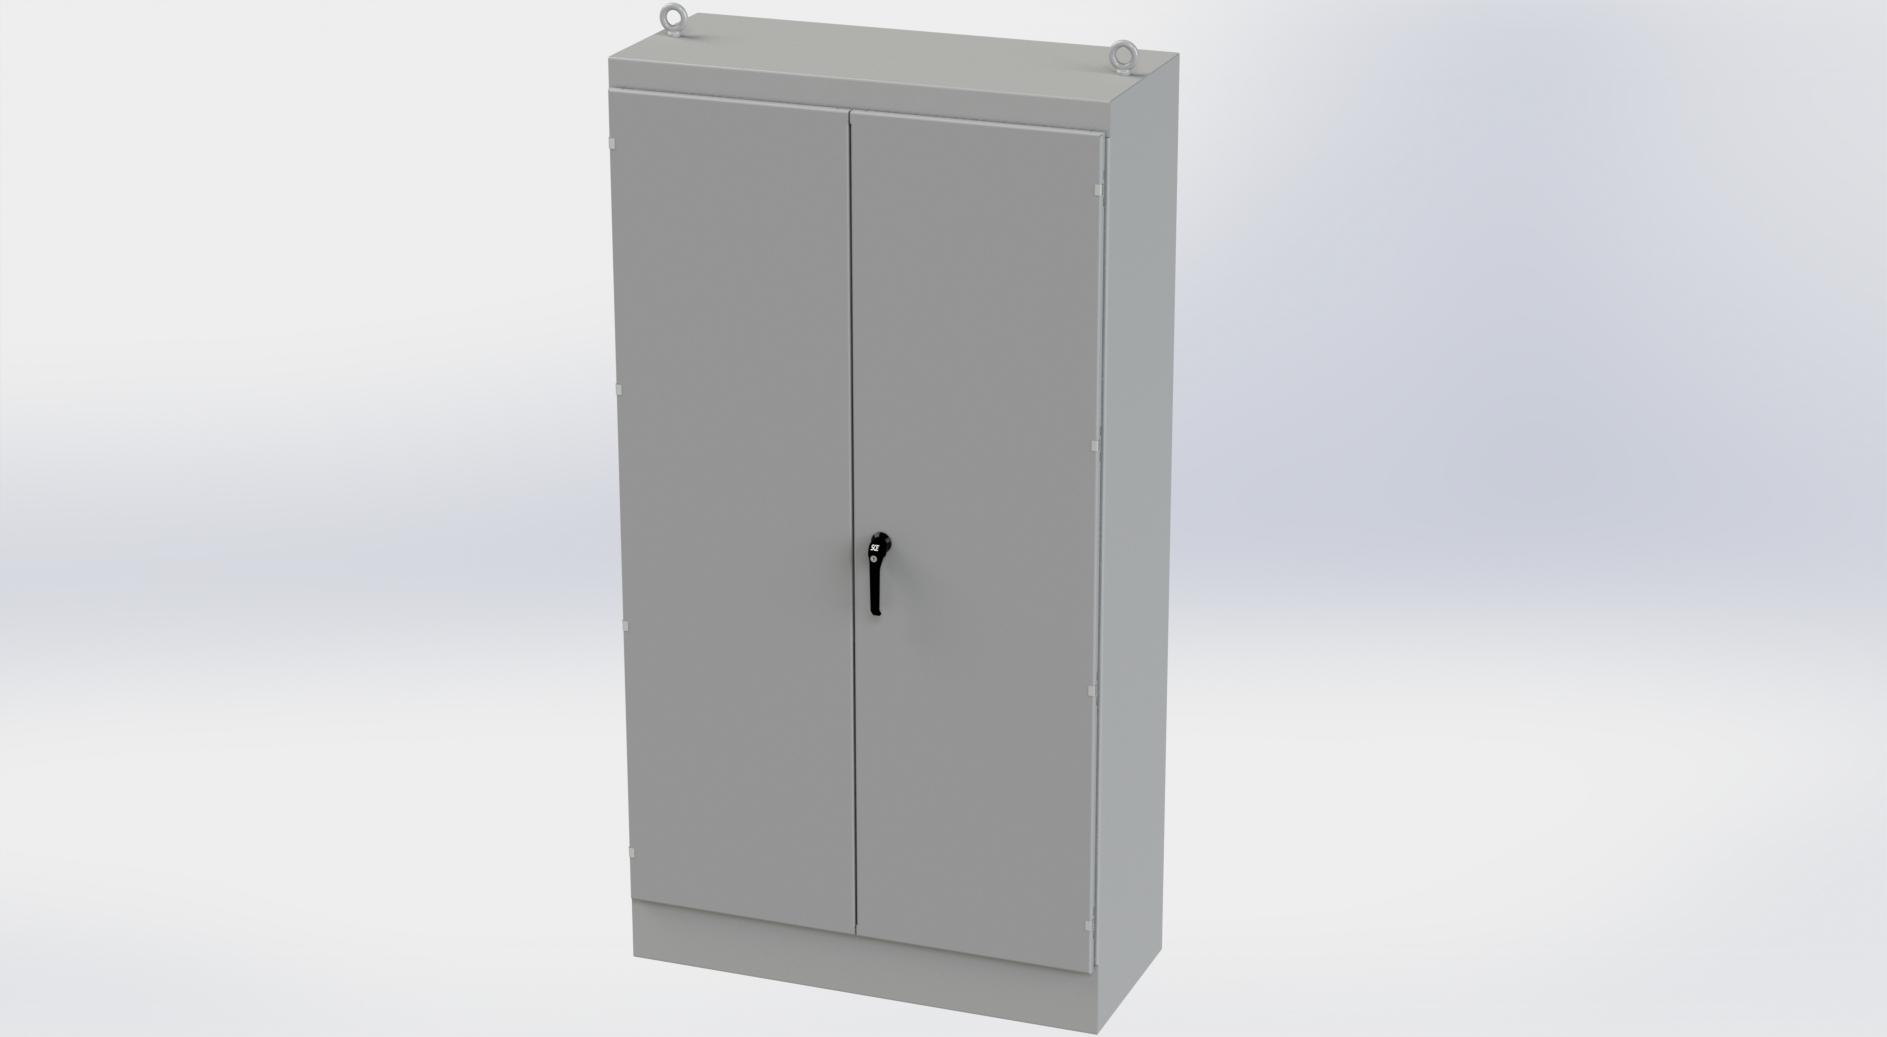 Saginaw Control SCE-904820FSD FSD Enclosure, Height:90.00", Width:48.00", Depth:20.00", ANSI-61 gray finish inside and out. Optional sub-panels are powder coated white.